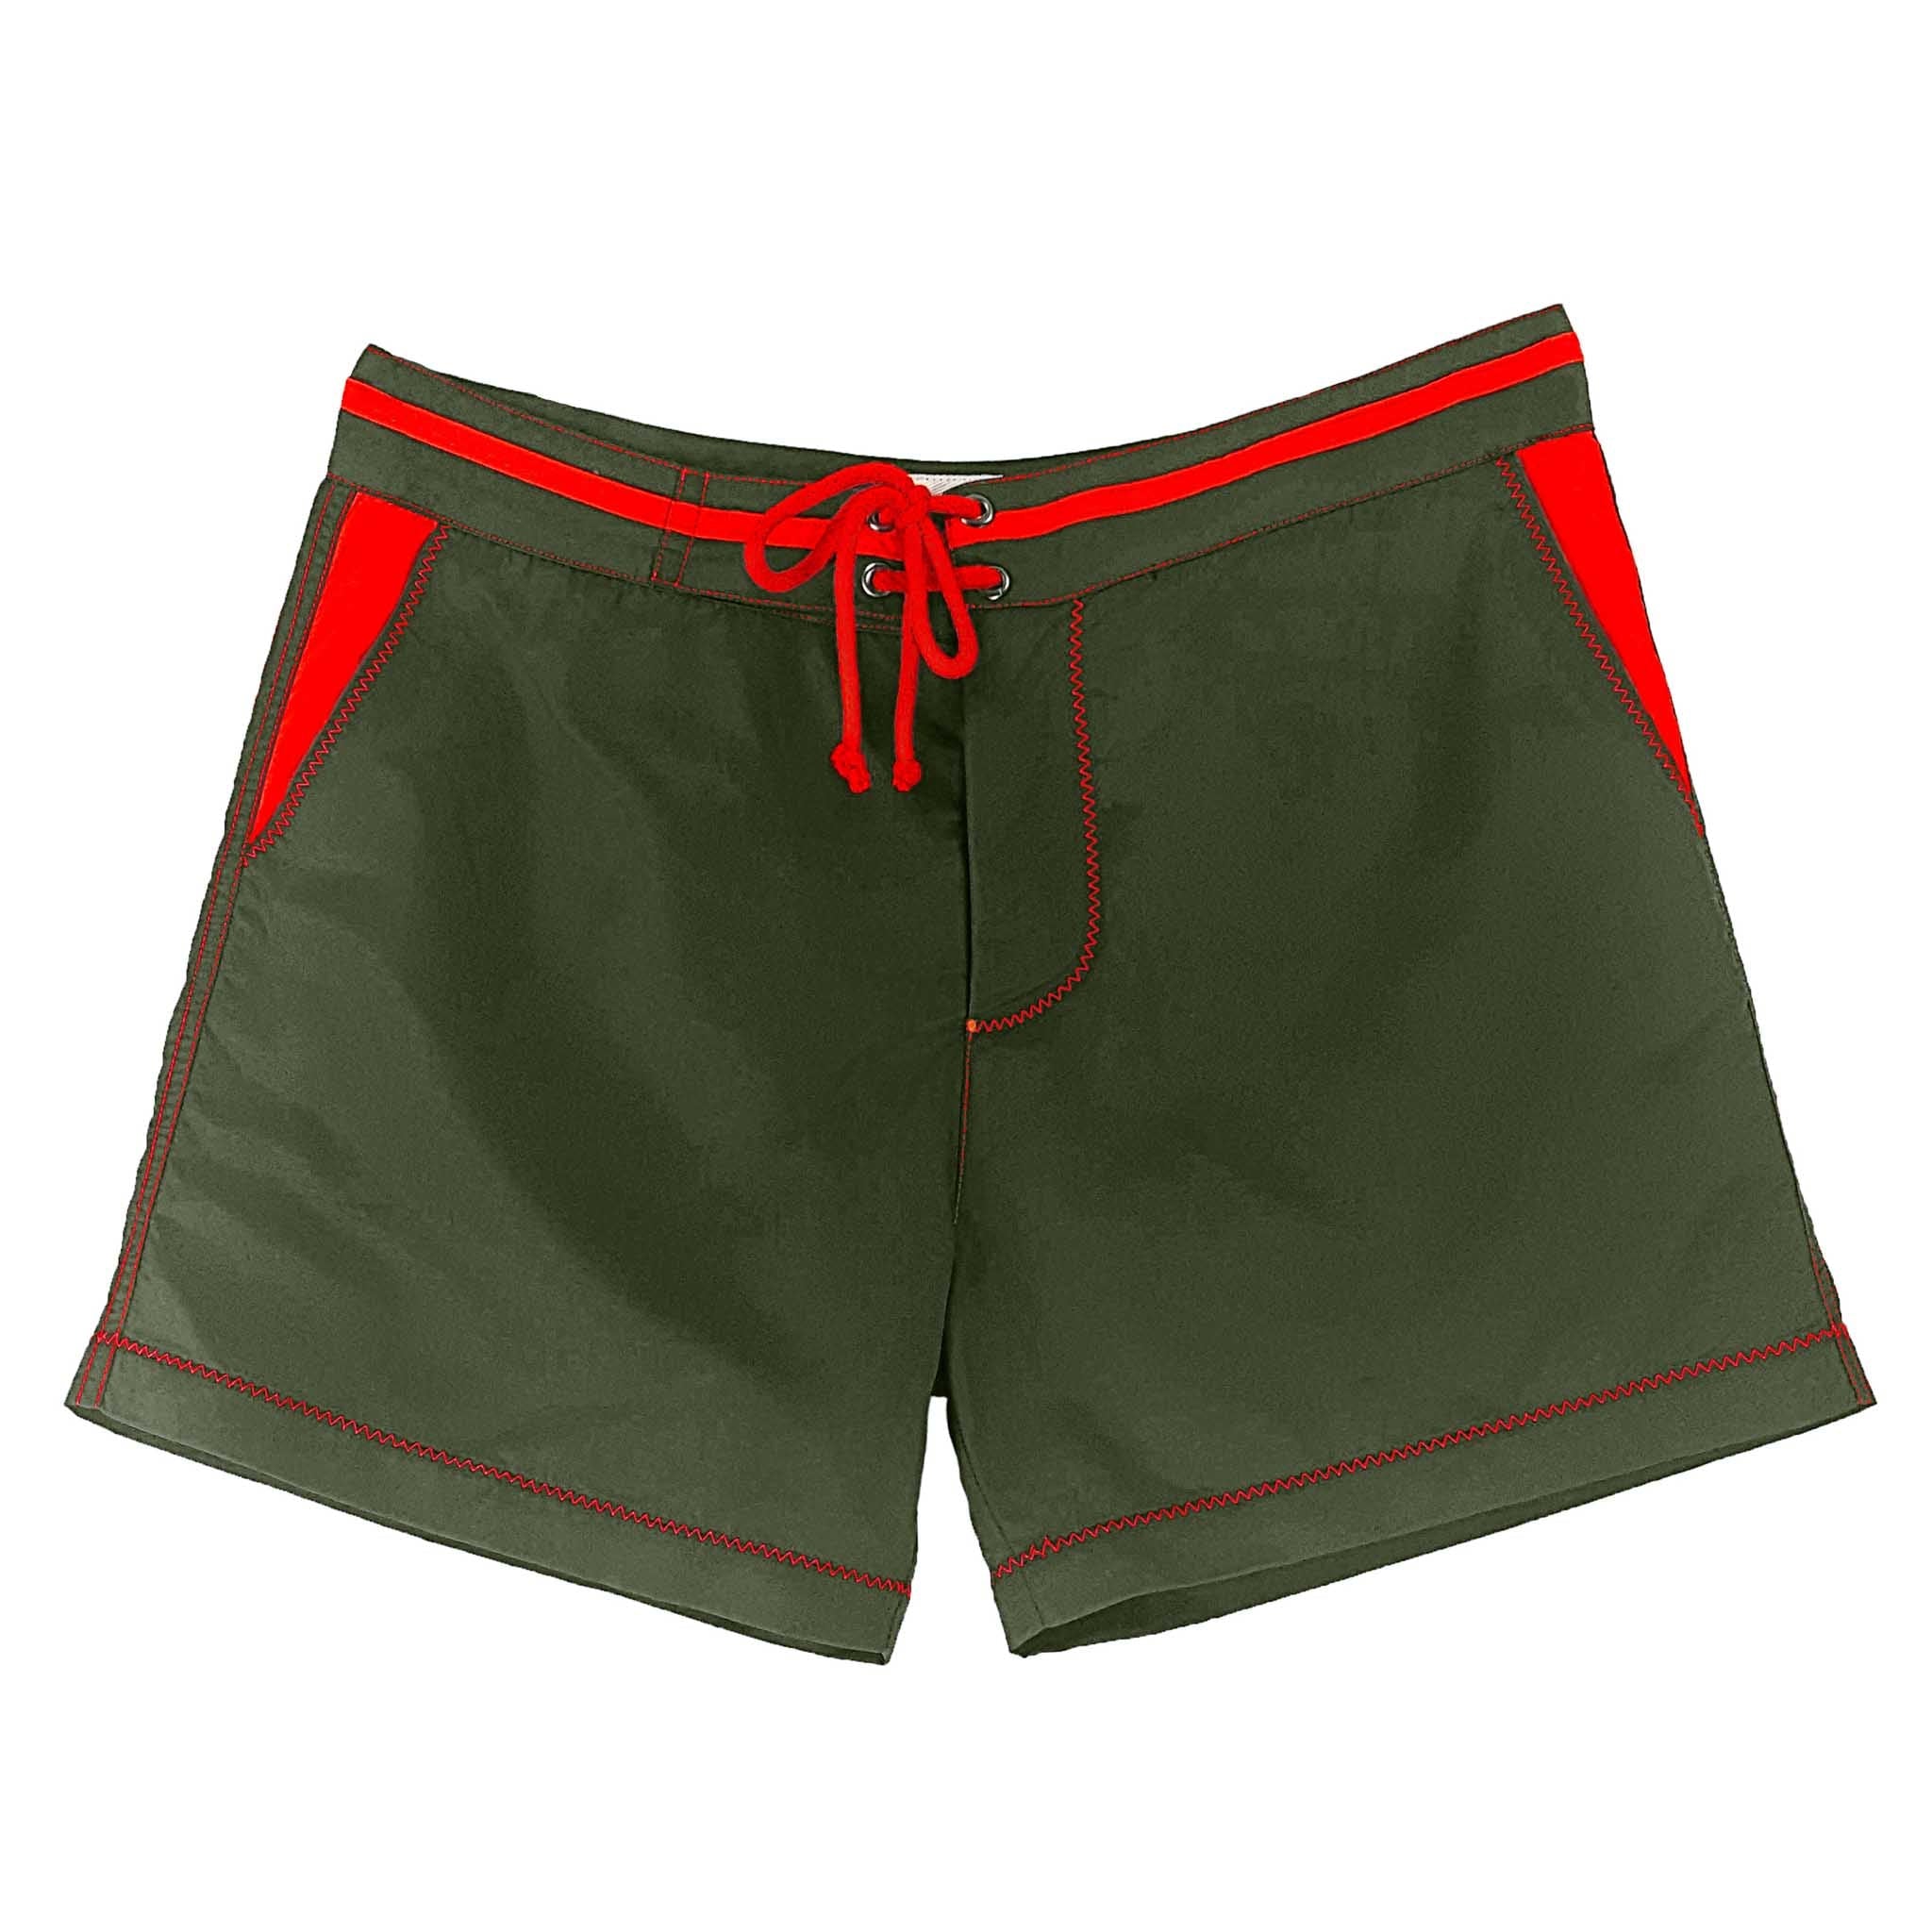 Dark green swimming trunks made from recycled polyester from Bluebuck